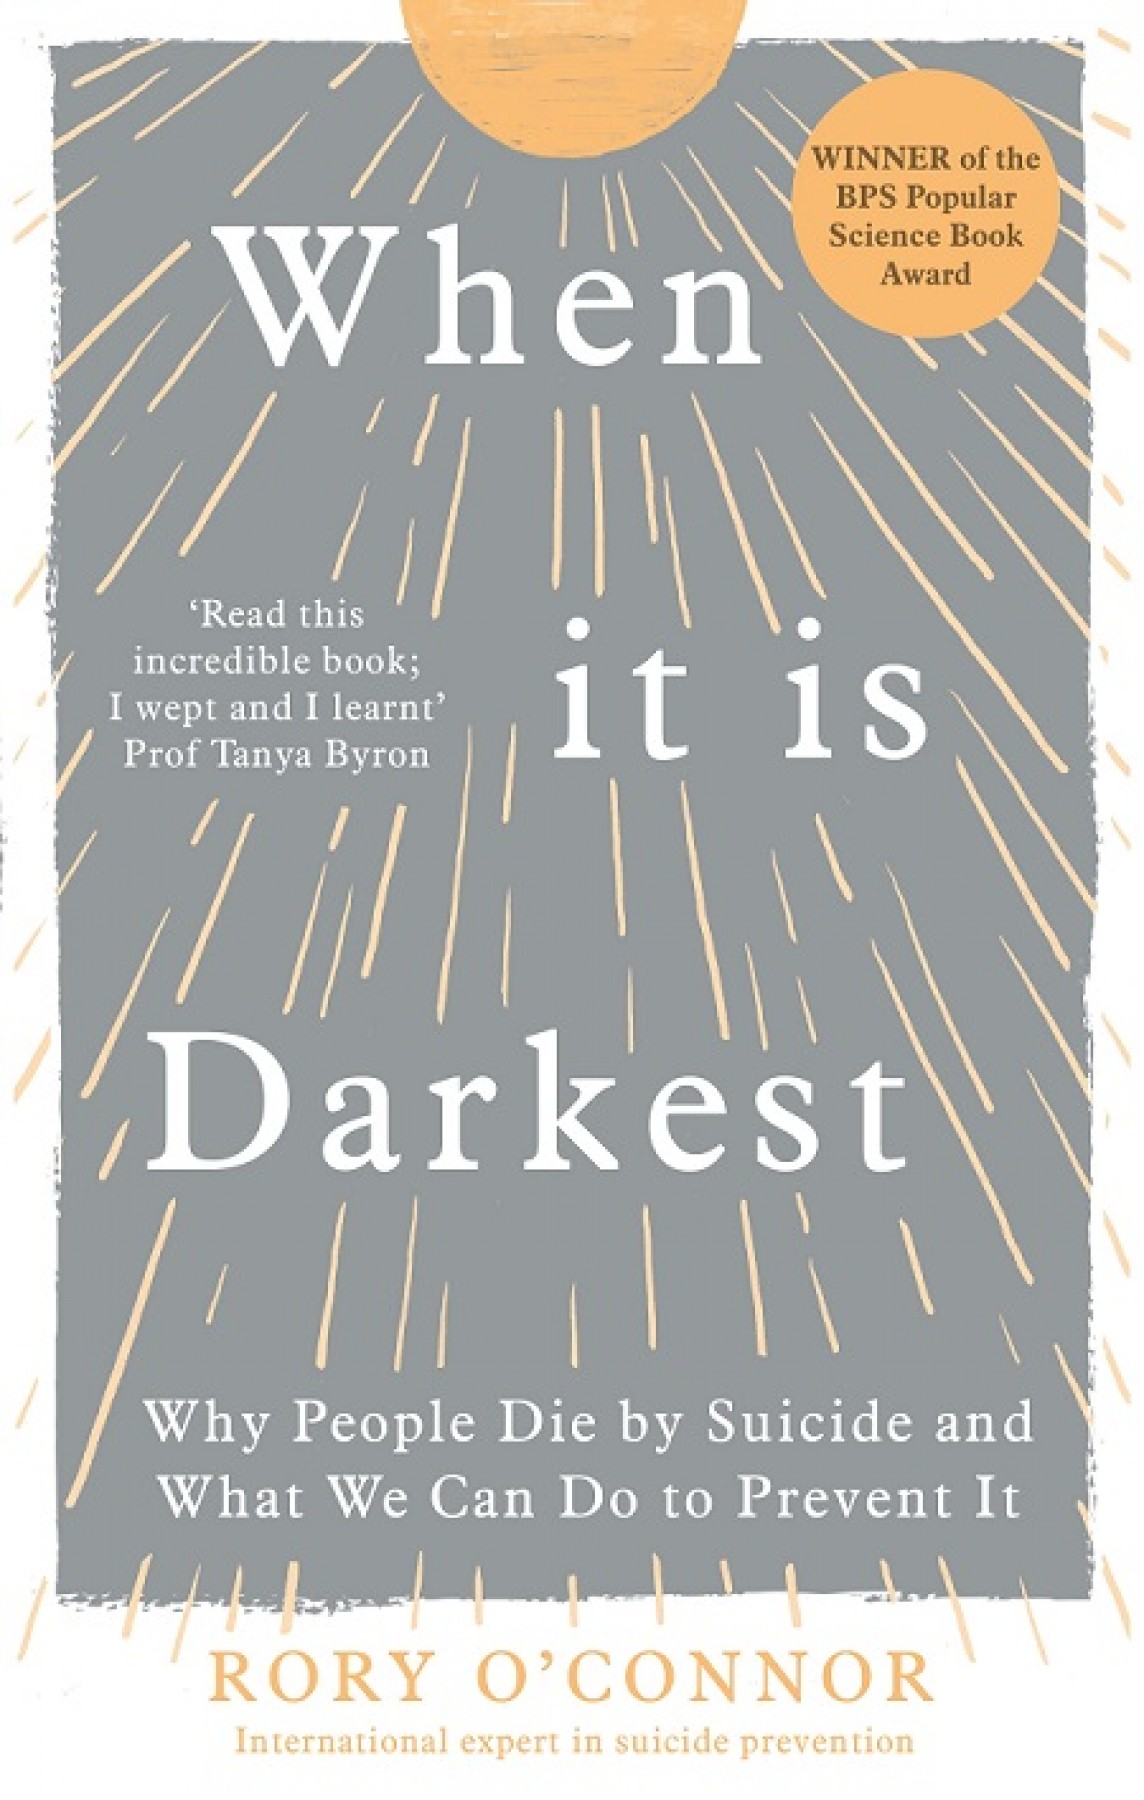 When it is darkest: Why people die by suicide and what we can do to prevent it